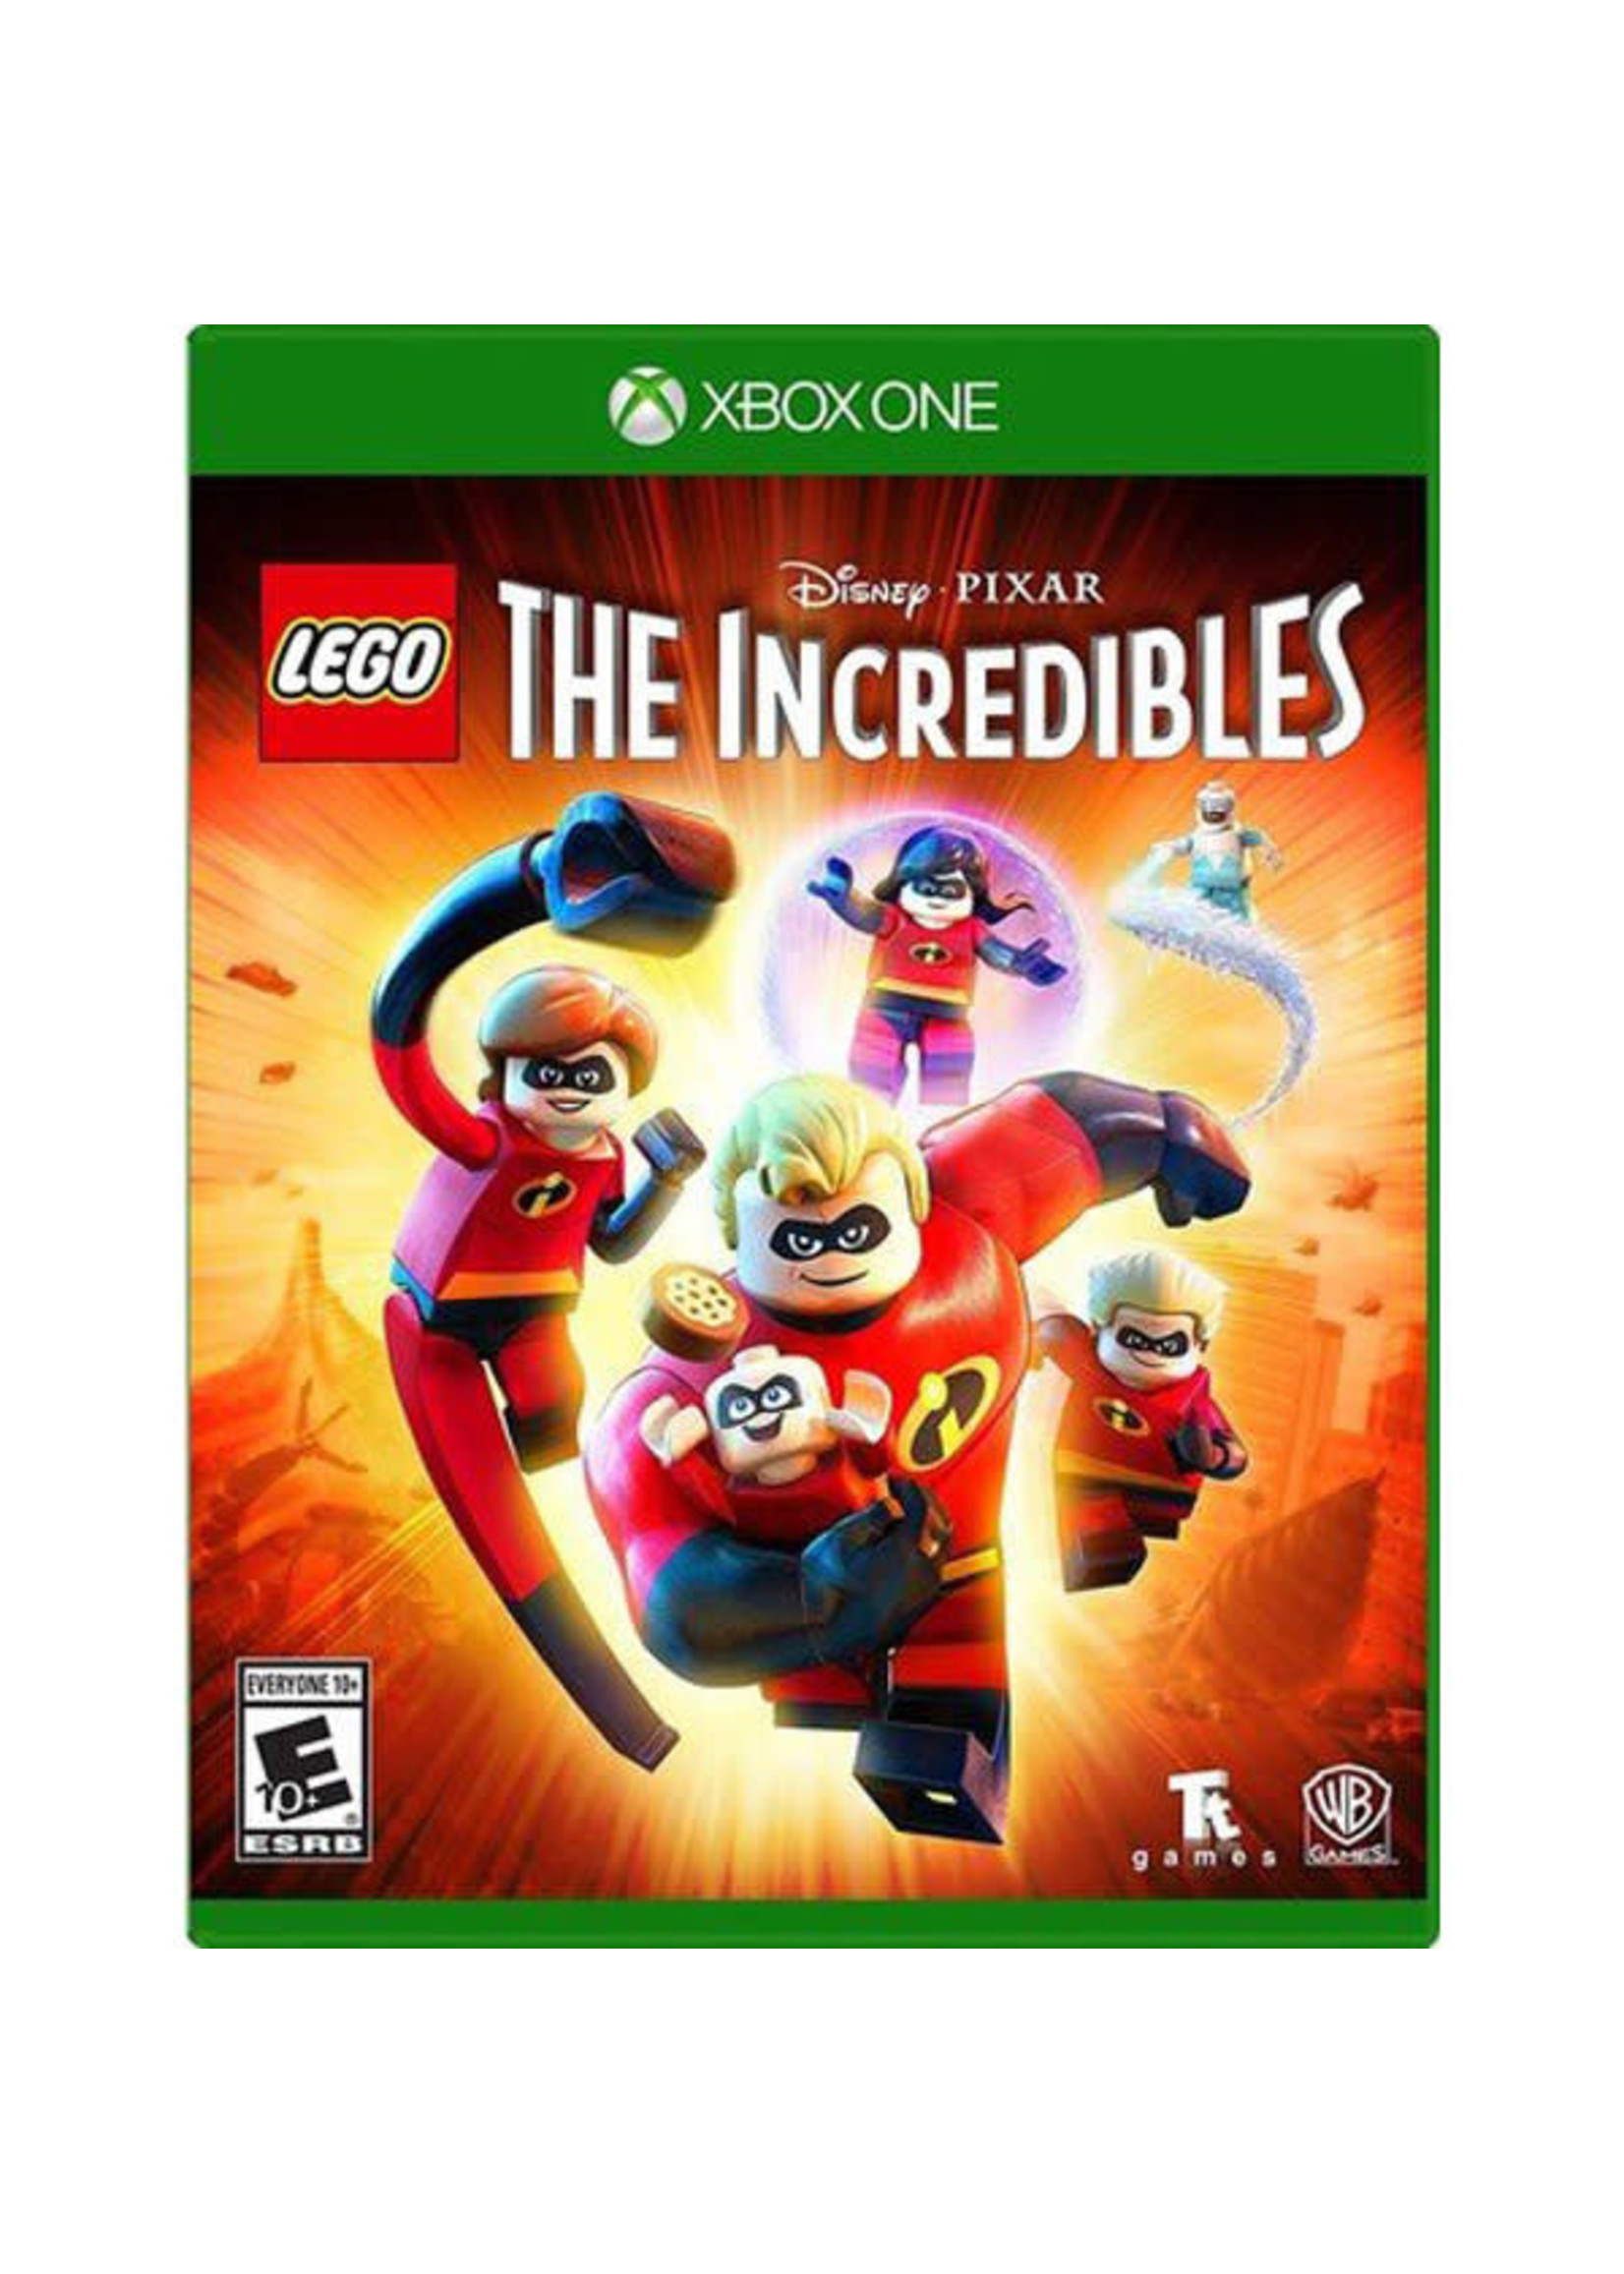 LEGO THE INCREDIBLES  XBOX ONE (USAGÉ)